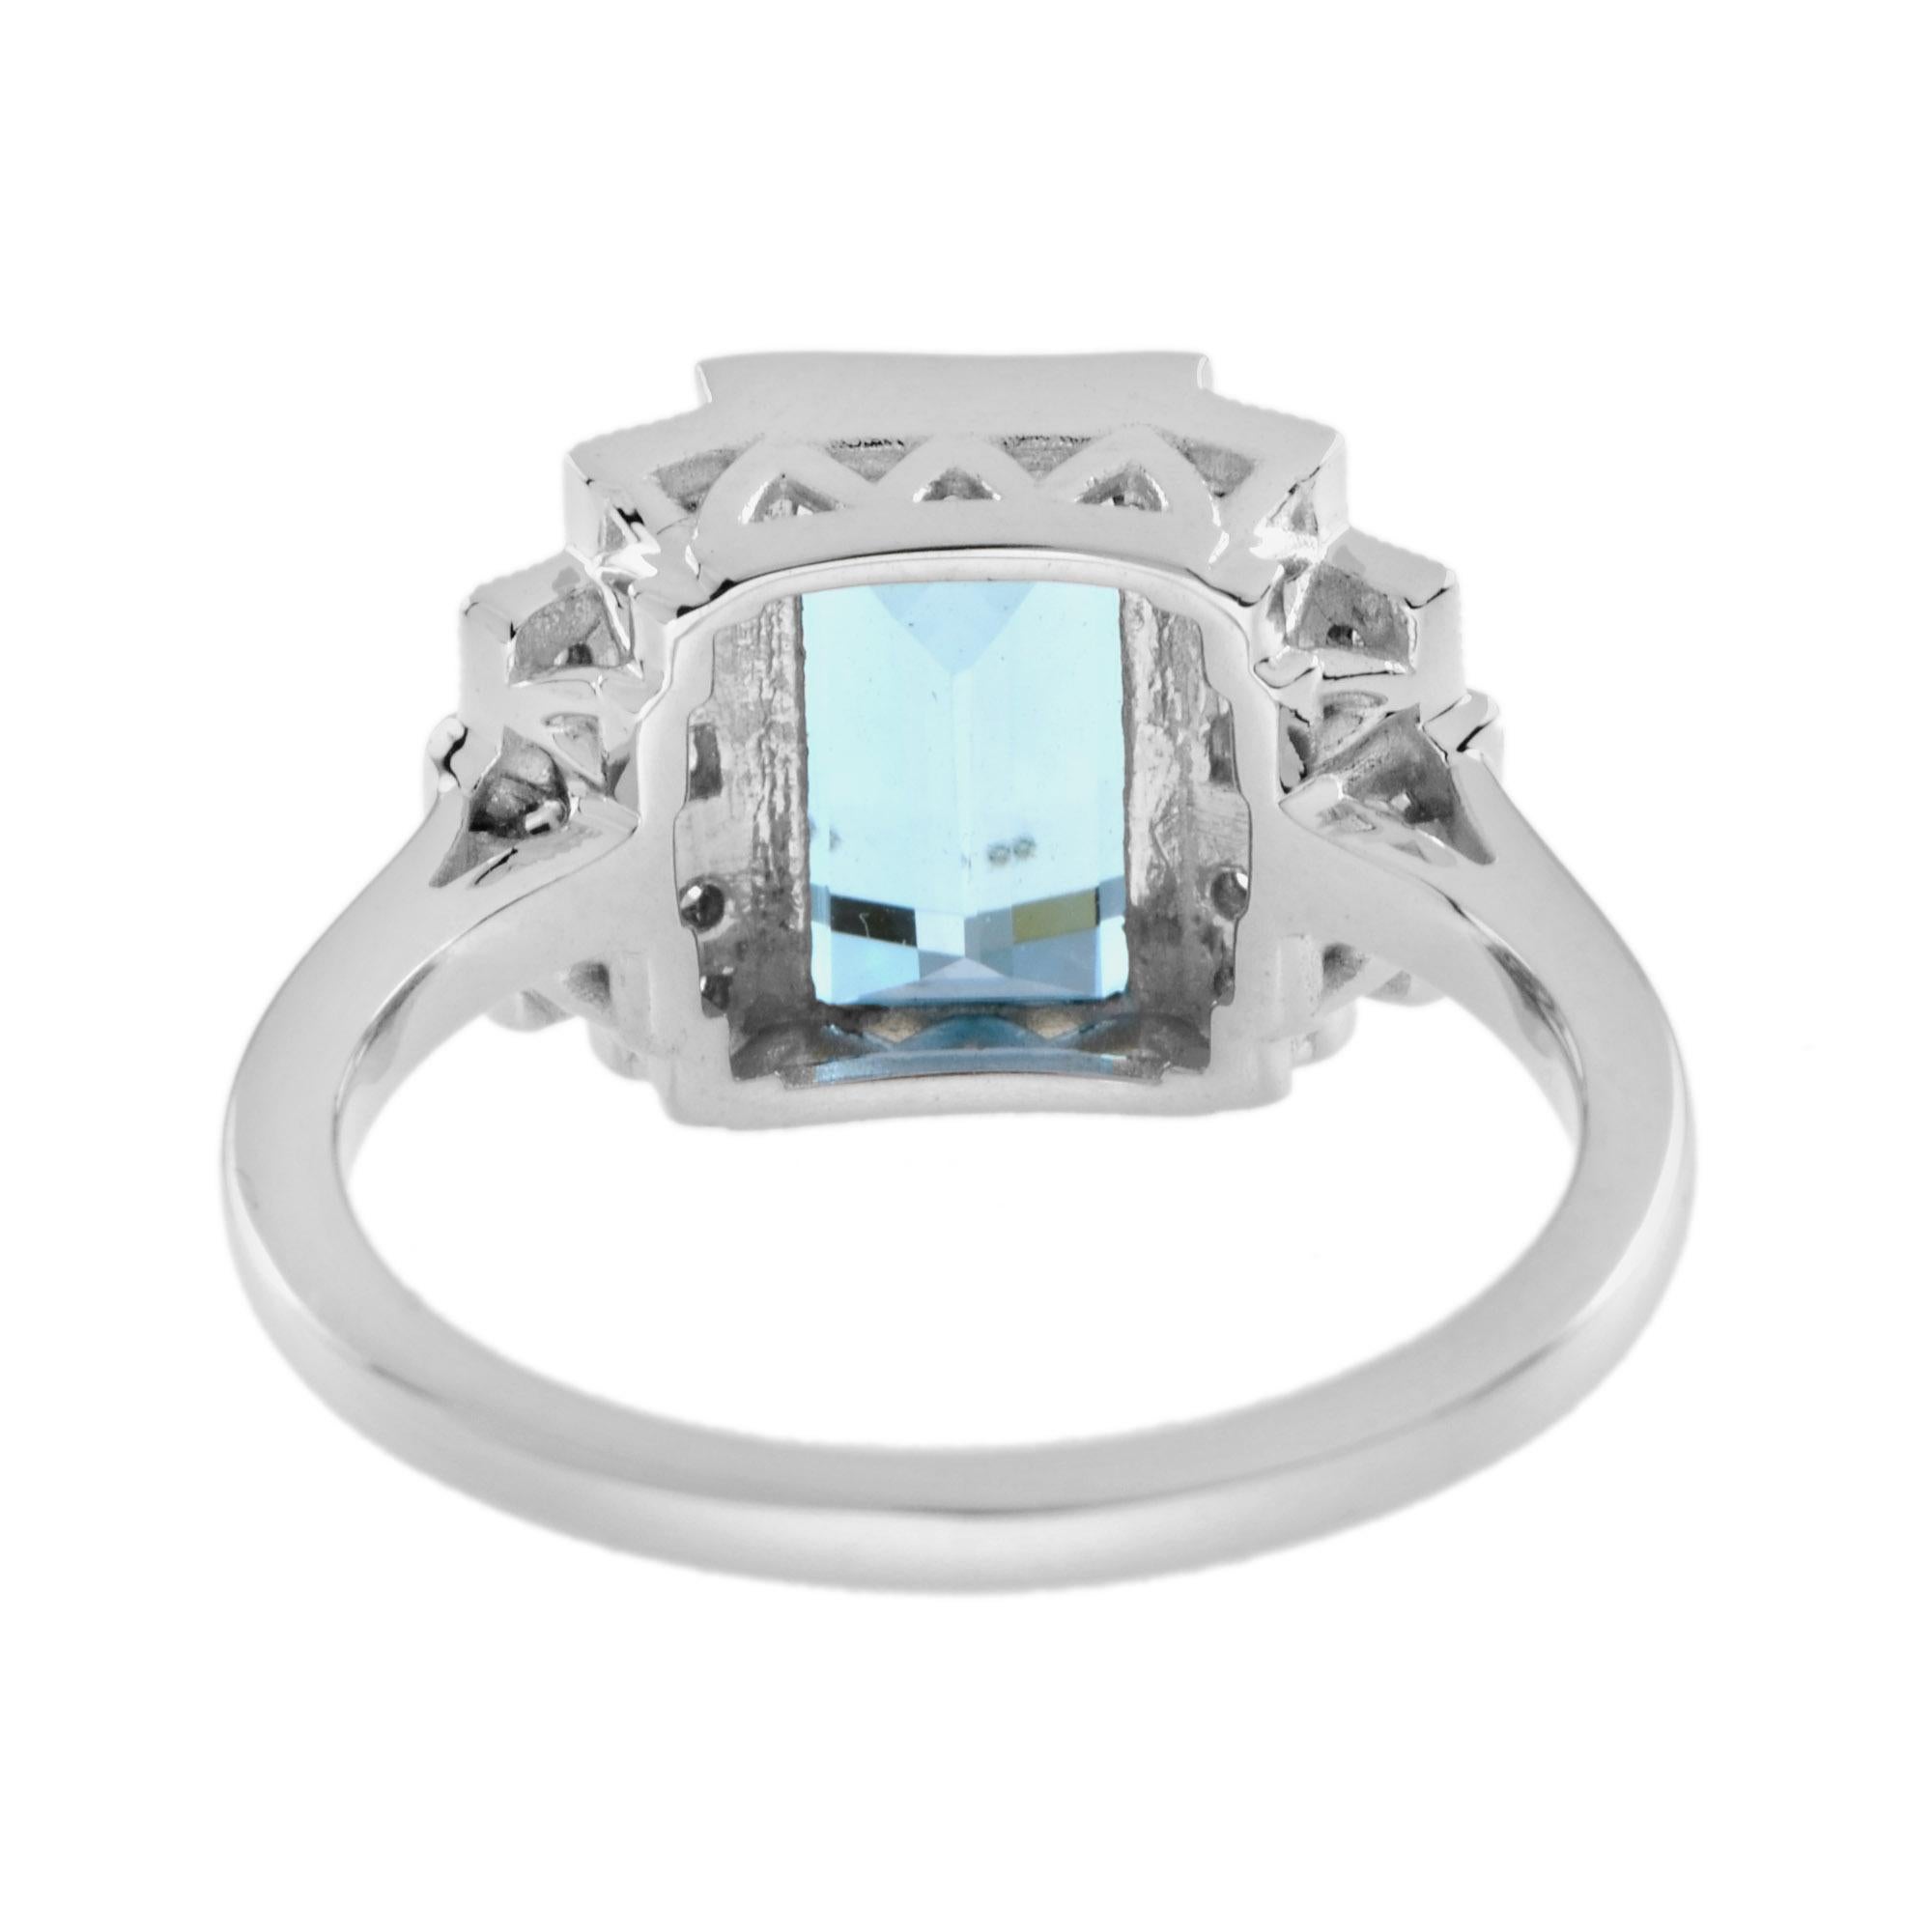 Women's 3.50 Ct. Aquamarine and Diamond Art Deco Style Cocktail Ring in 18K White Gold For Sale